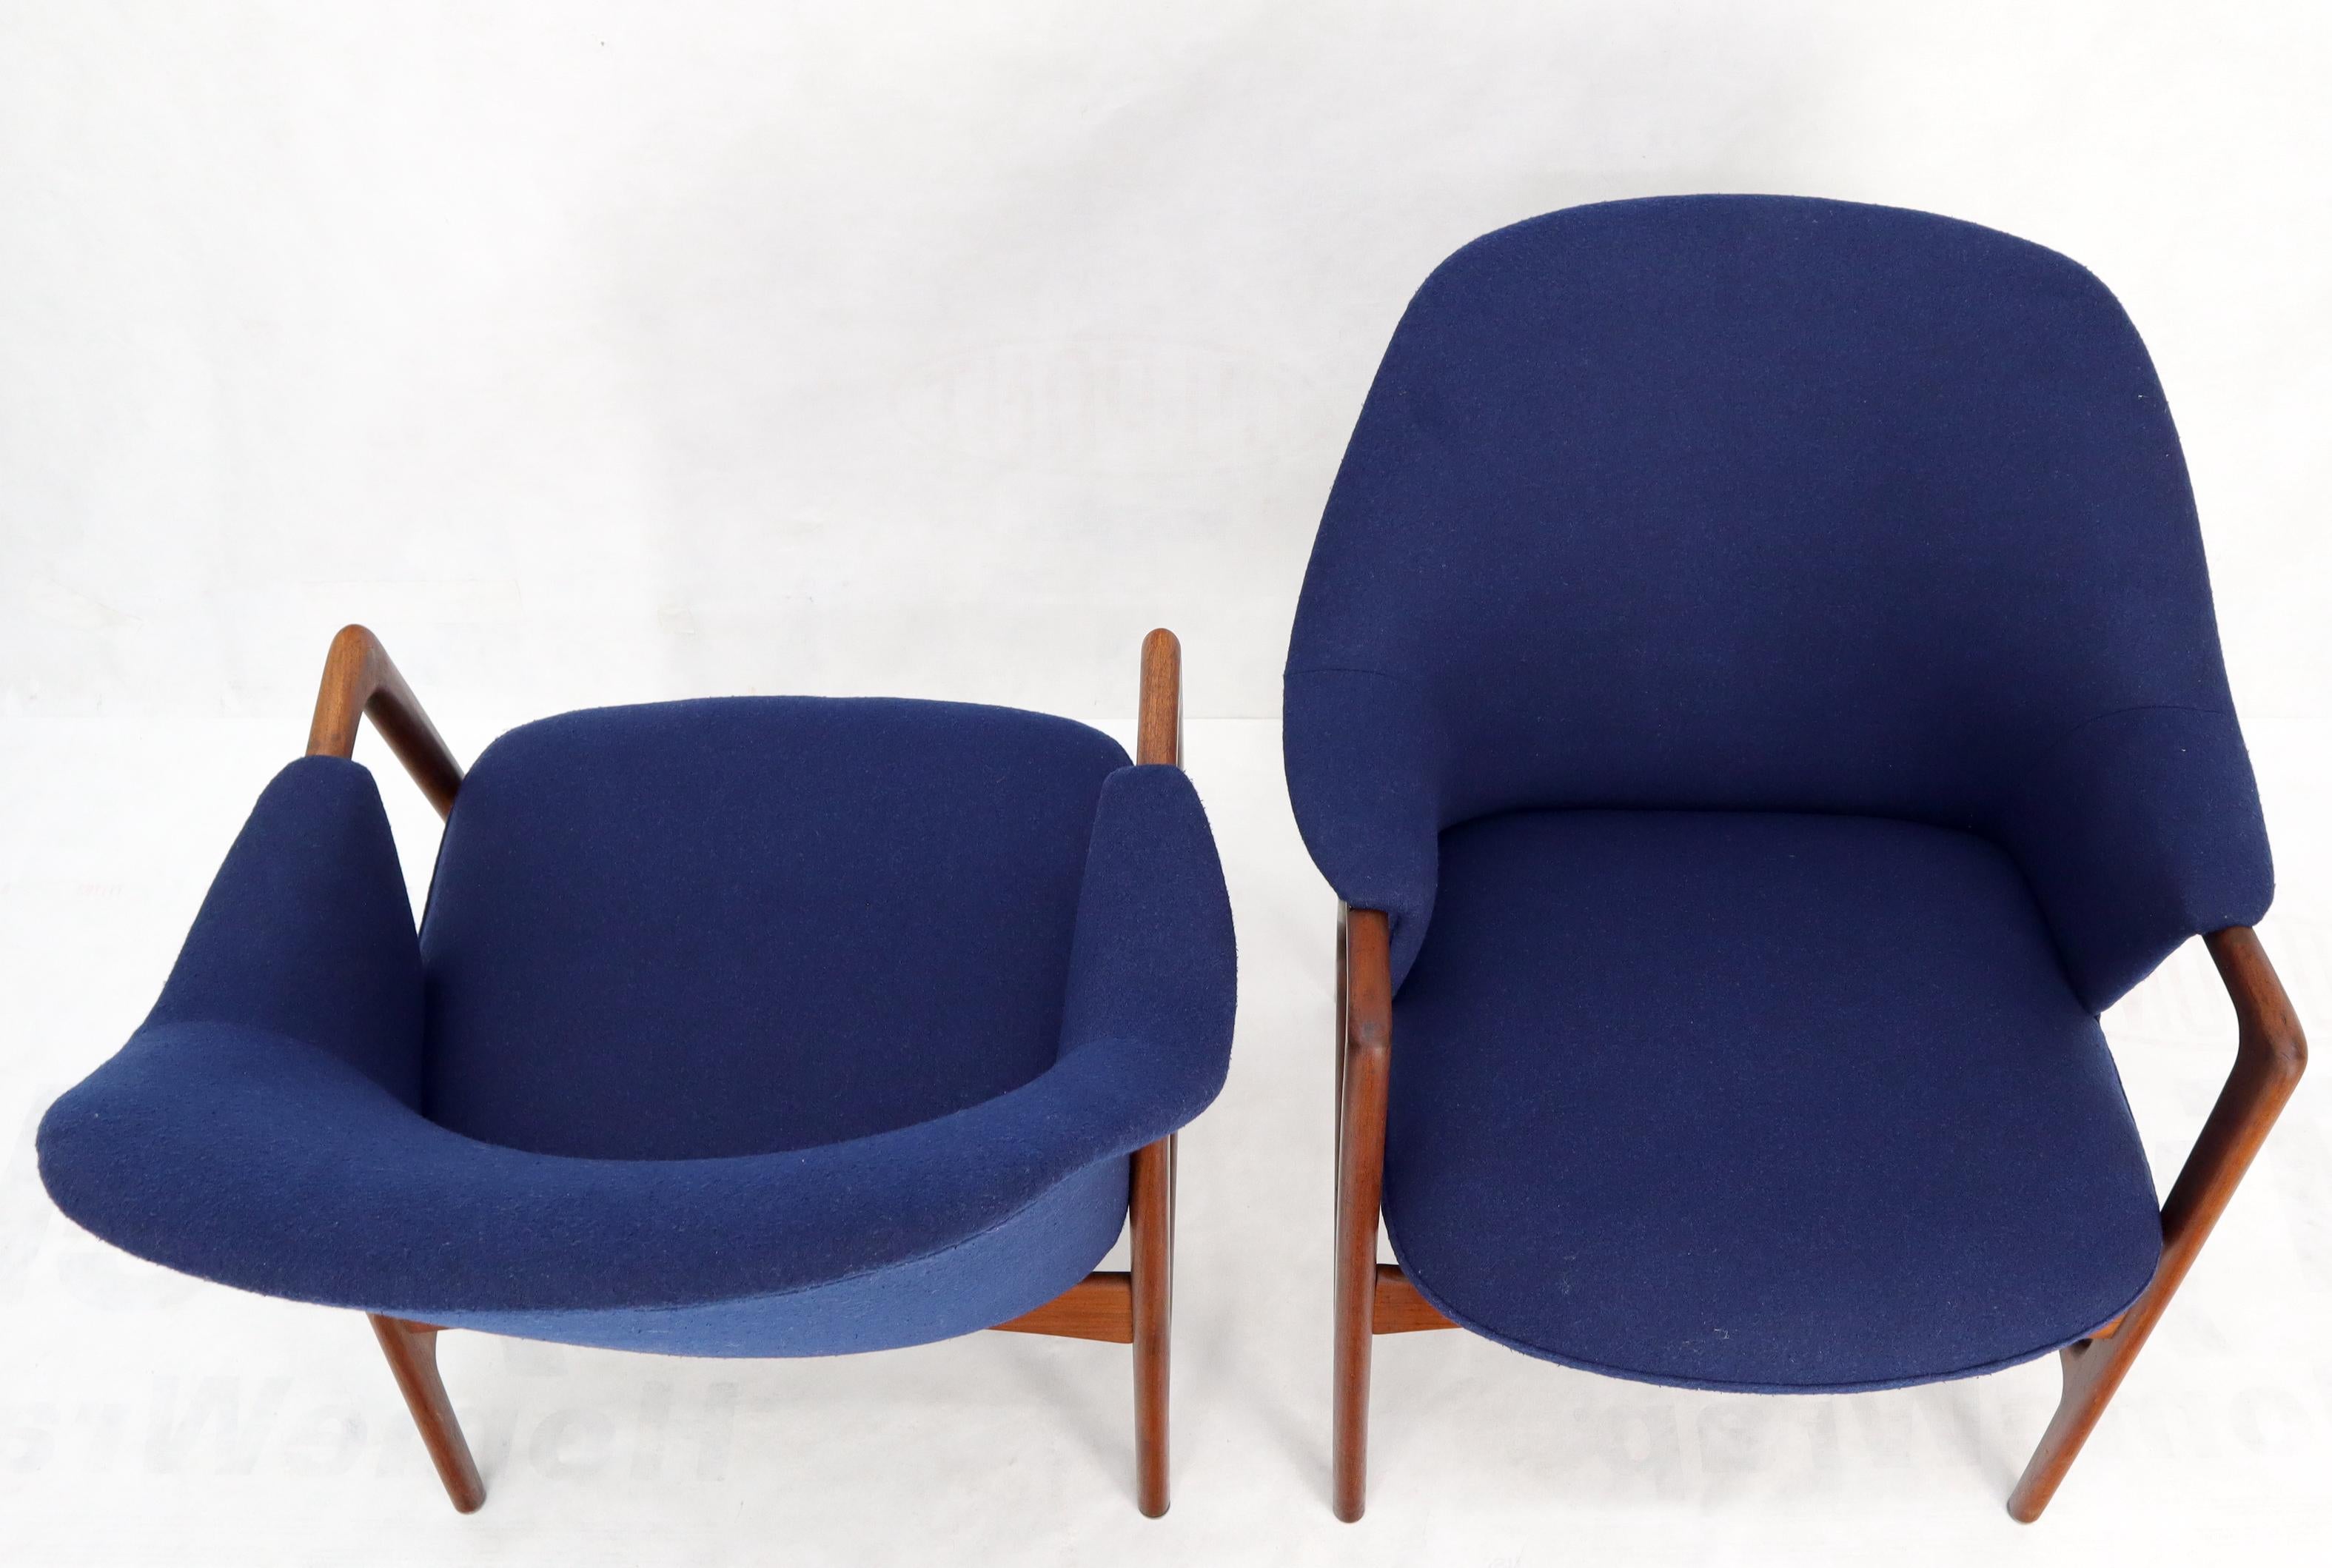 New Blue Wool Upholstery Teak Frames Danish Mid-Century Modern Lounge Chairs For Sale 9